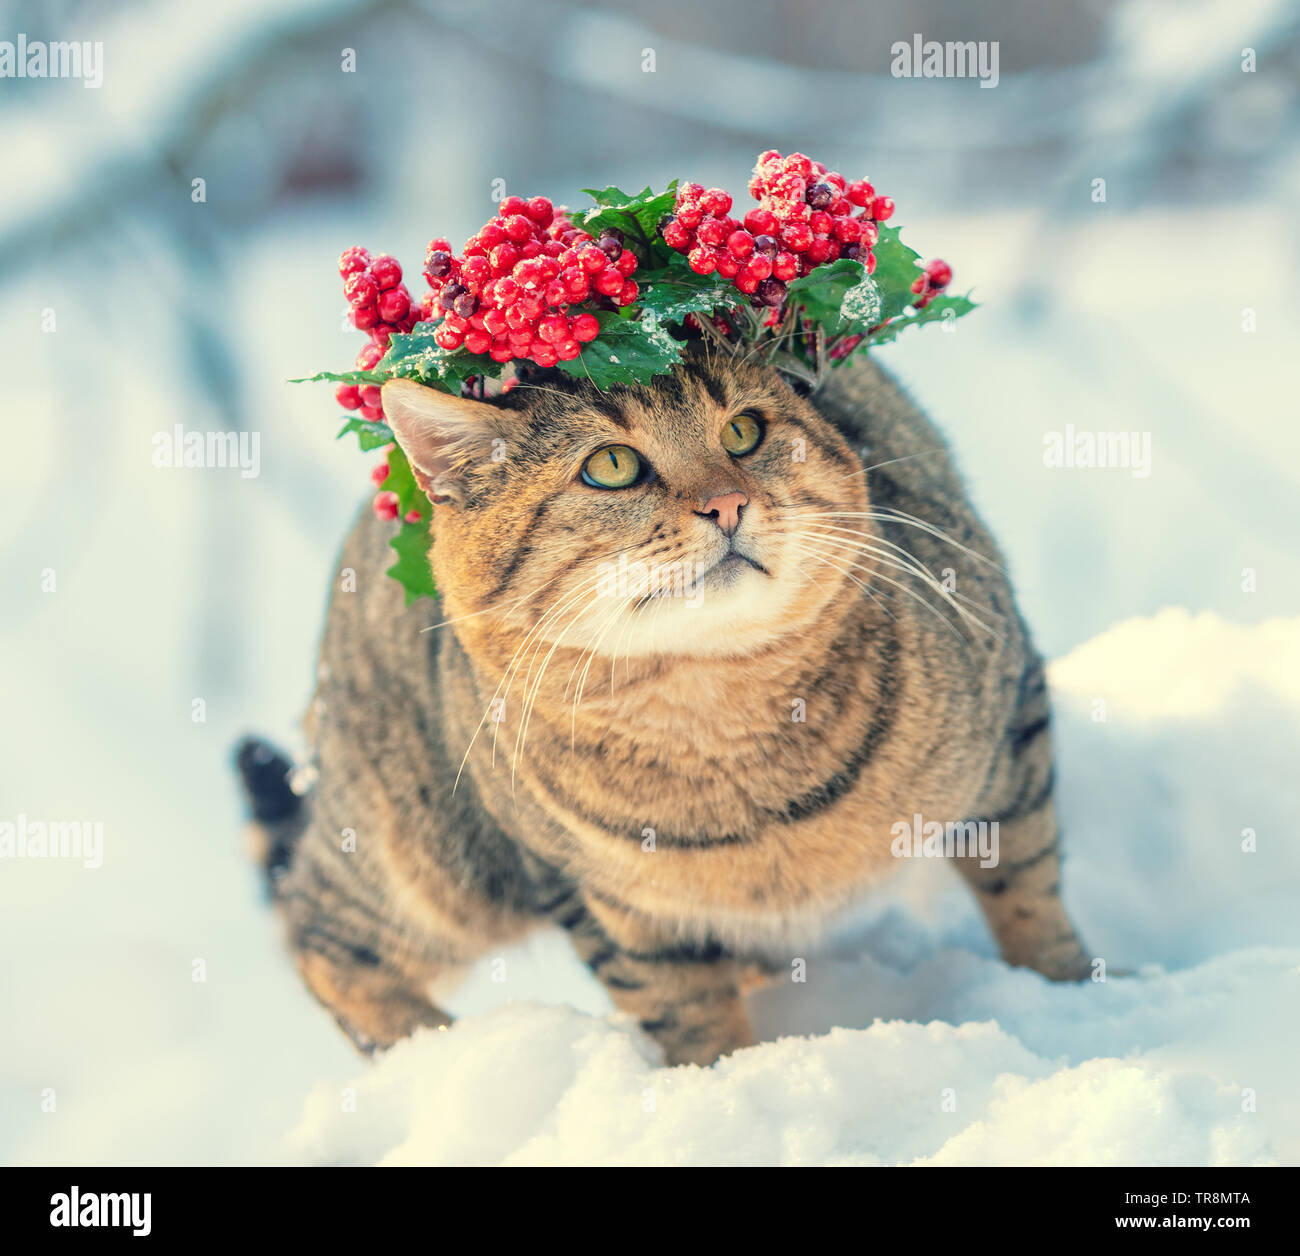 Cat wearing Christmas wreath walking on the snow in winter Stock Photo